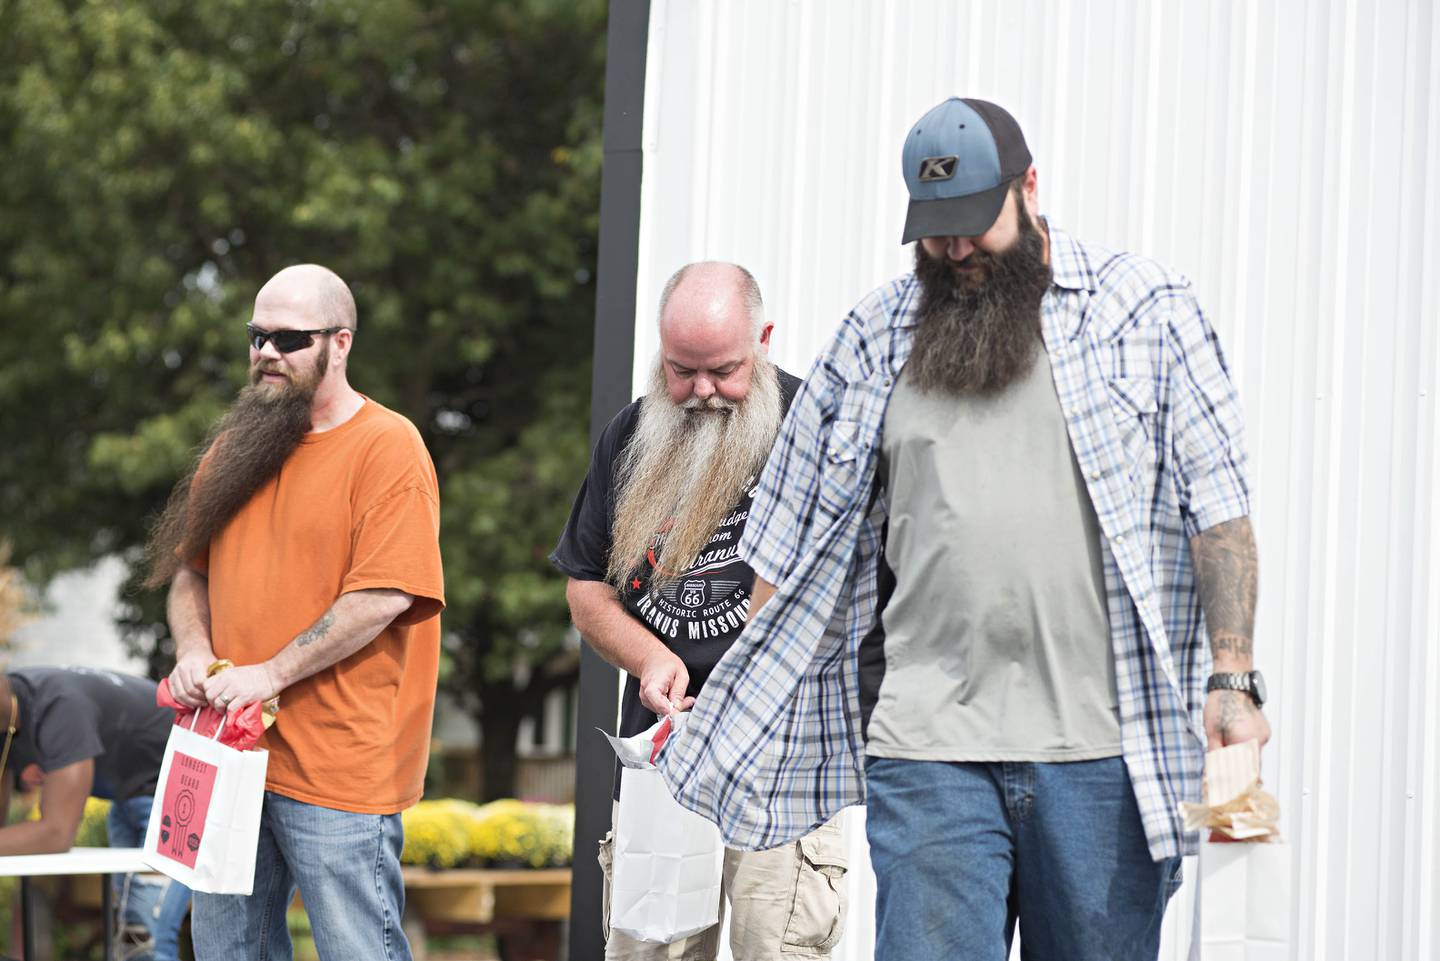 Rock Falls Tourism hosted a beard contest at last year's Lumberjack show. Winners for the longest beards were Dustin Coughenour (left), Ron Ludlow and Tim Hantel.